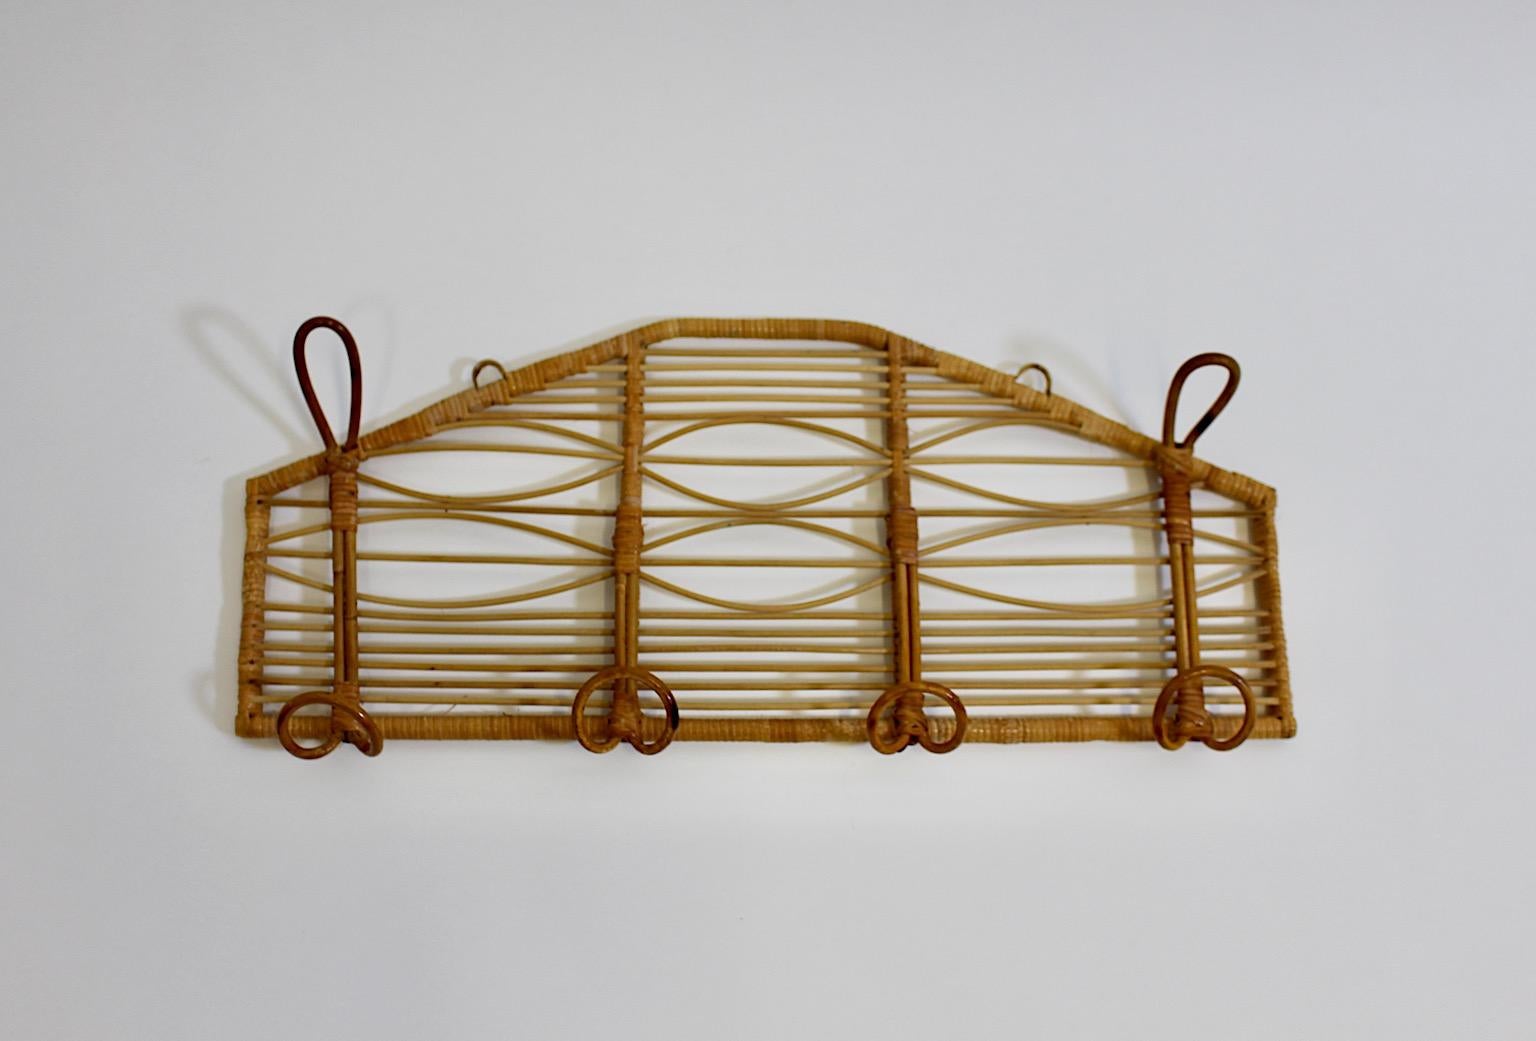 Riviera Style organic modern vintage wall coat rack with 5 hooks from rattan network 1960s Italy.
A wonderful wall mounted coat rack rectangular shape with 5 hooks in beautiful rattan network.
This rattan coat rack in graceful appearance works